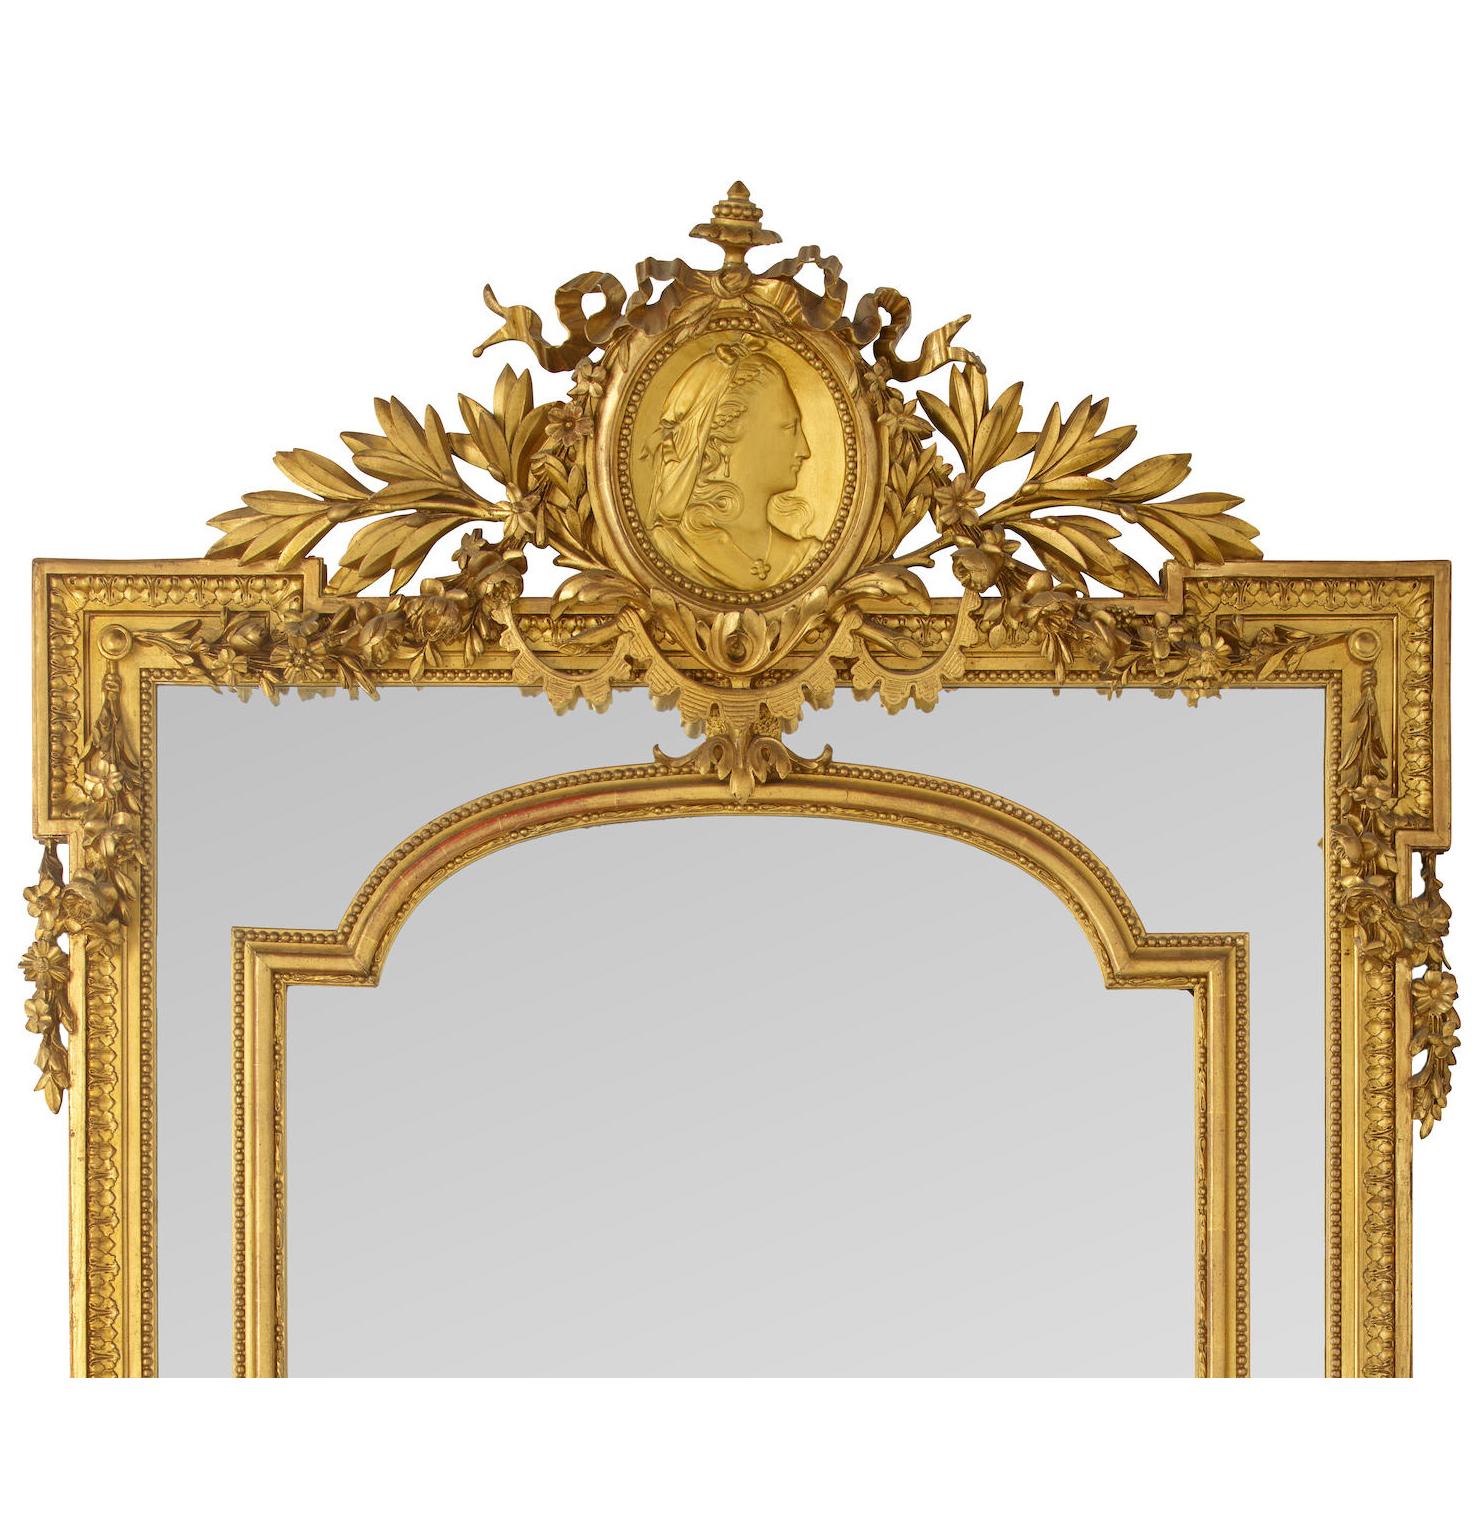 A Very Fine French 19th Century Louis XVI Style Gilt-Wood and Gilt-Gesso Carved Ornamental Mantel Pier Mirror. The ornately decorated giltwood carved frame crowned with a shield medallion of a maiden flanked by leaves, flower wreaths, ribbons and